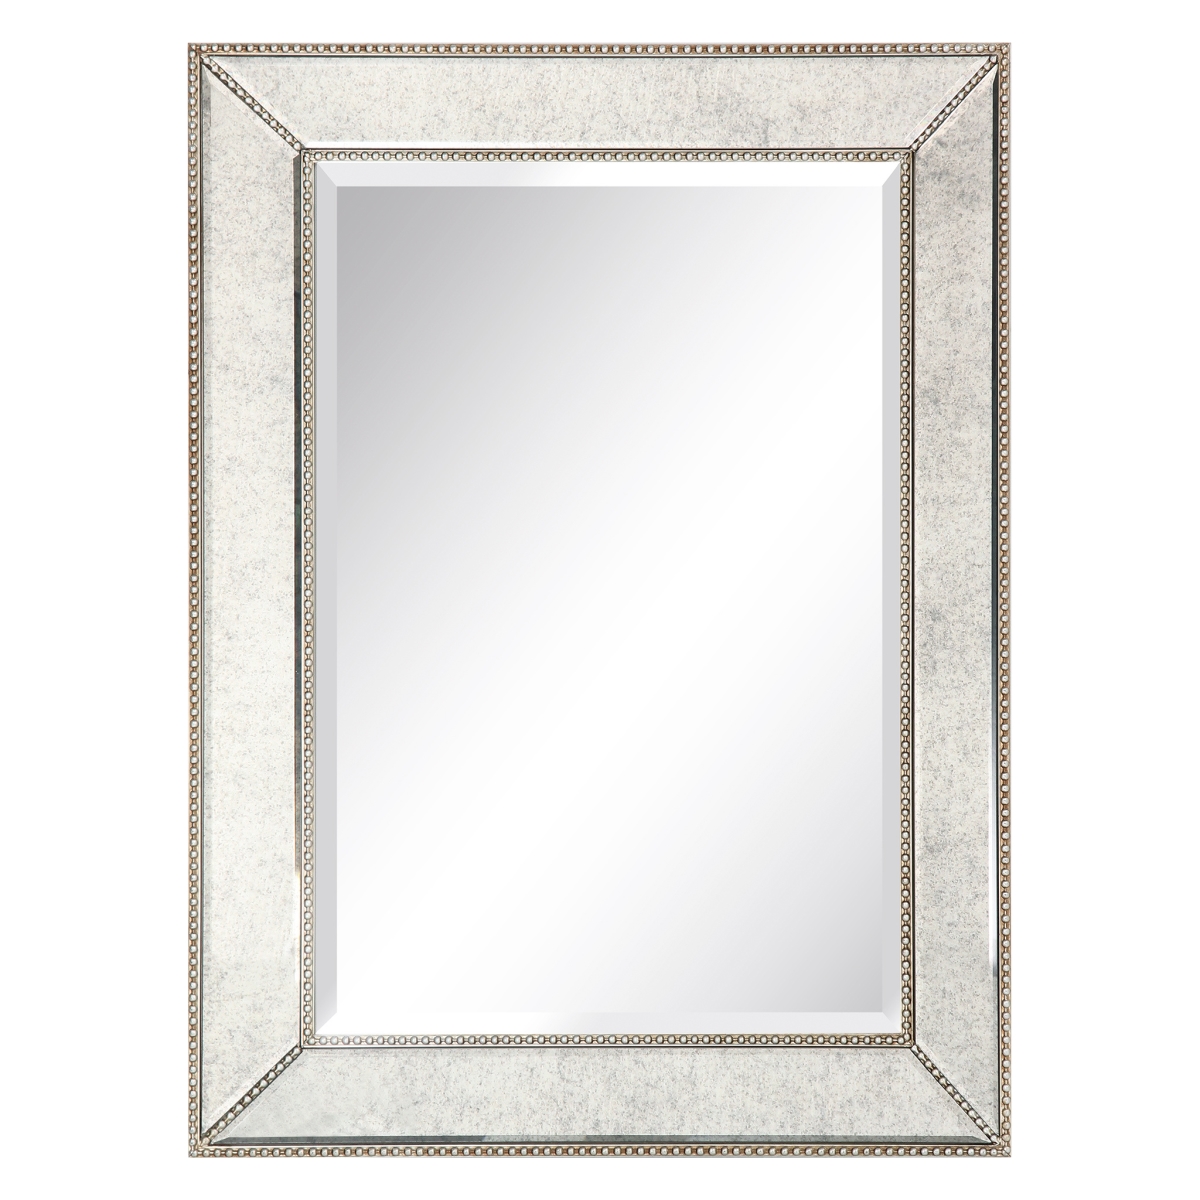 Mom-11069anp-4030 Champagne Beed Beveled Wall Mirrorsolid Wood Frame Covered With Beveled Antique Mirror Panels - 1 In. Beveled Center Mirror